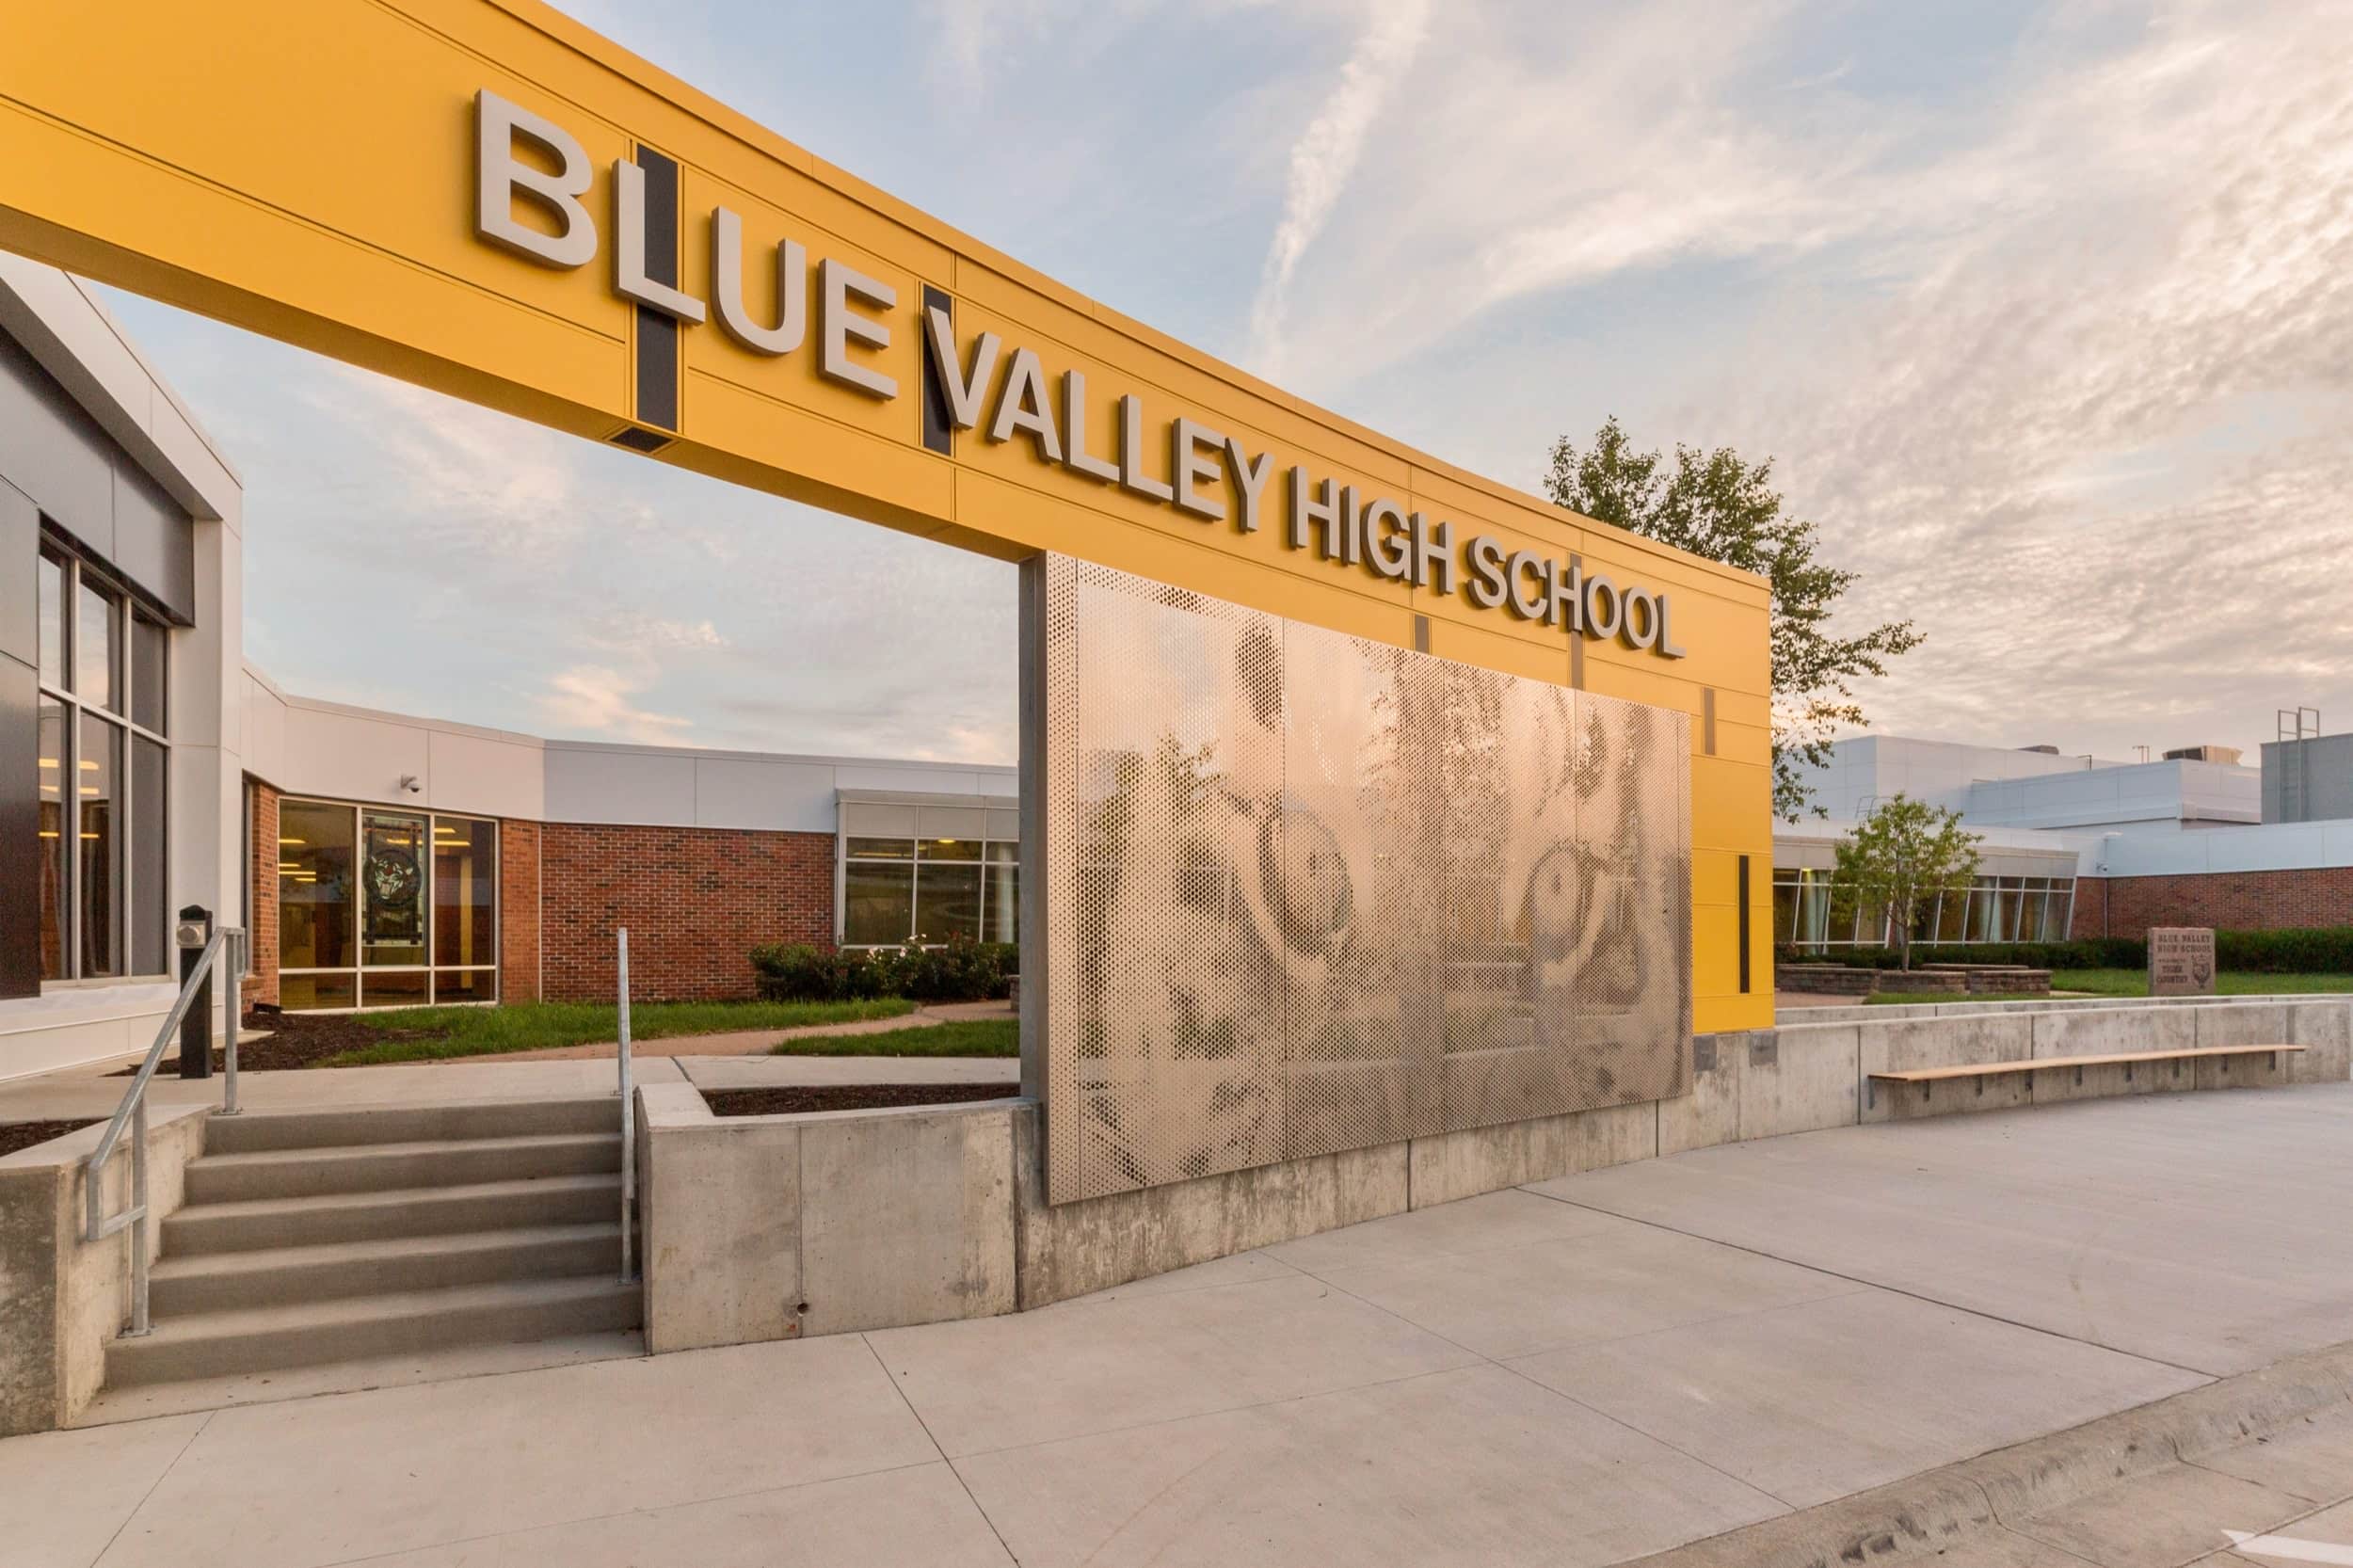 Blue Valley High School's mascot greets students and faculty alike as the enter the building.